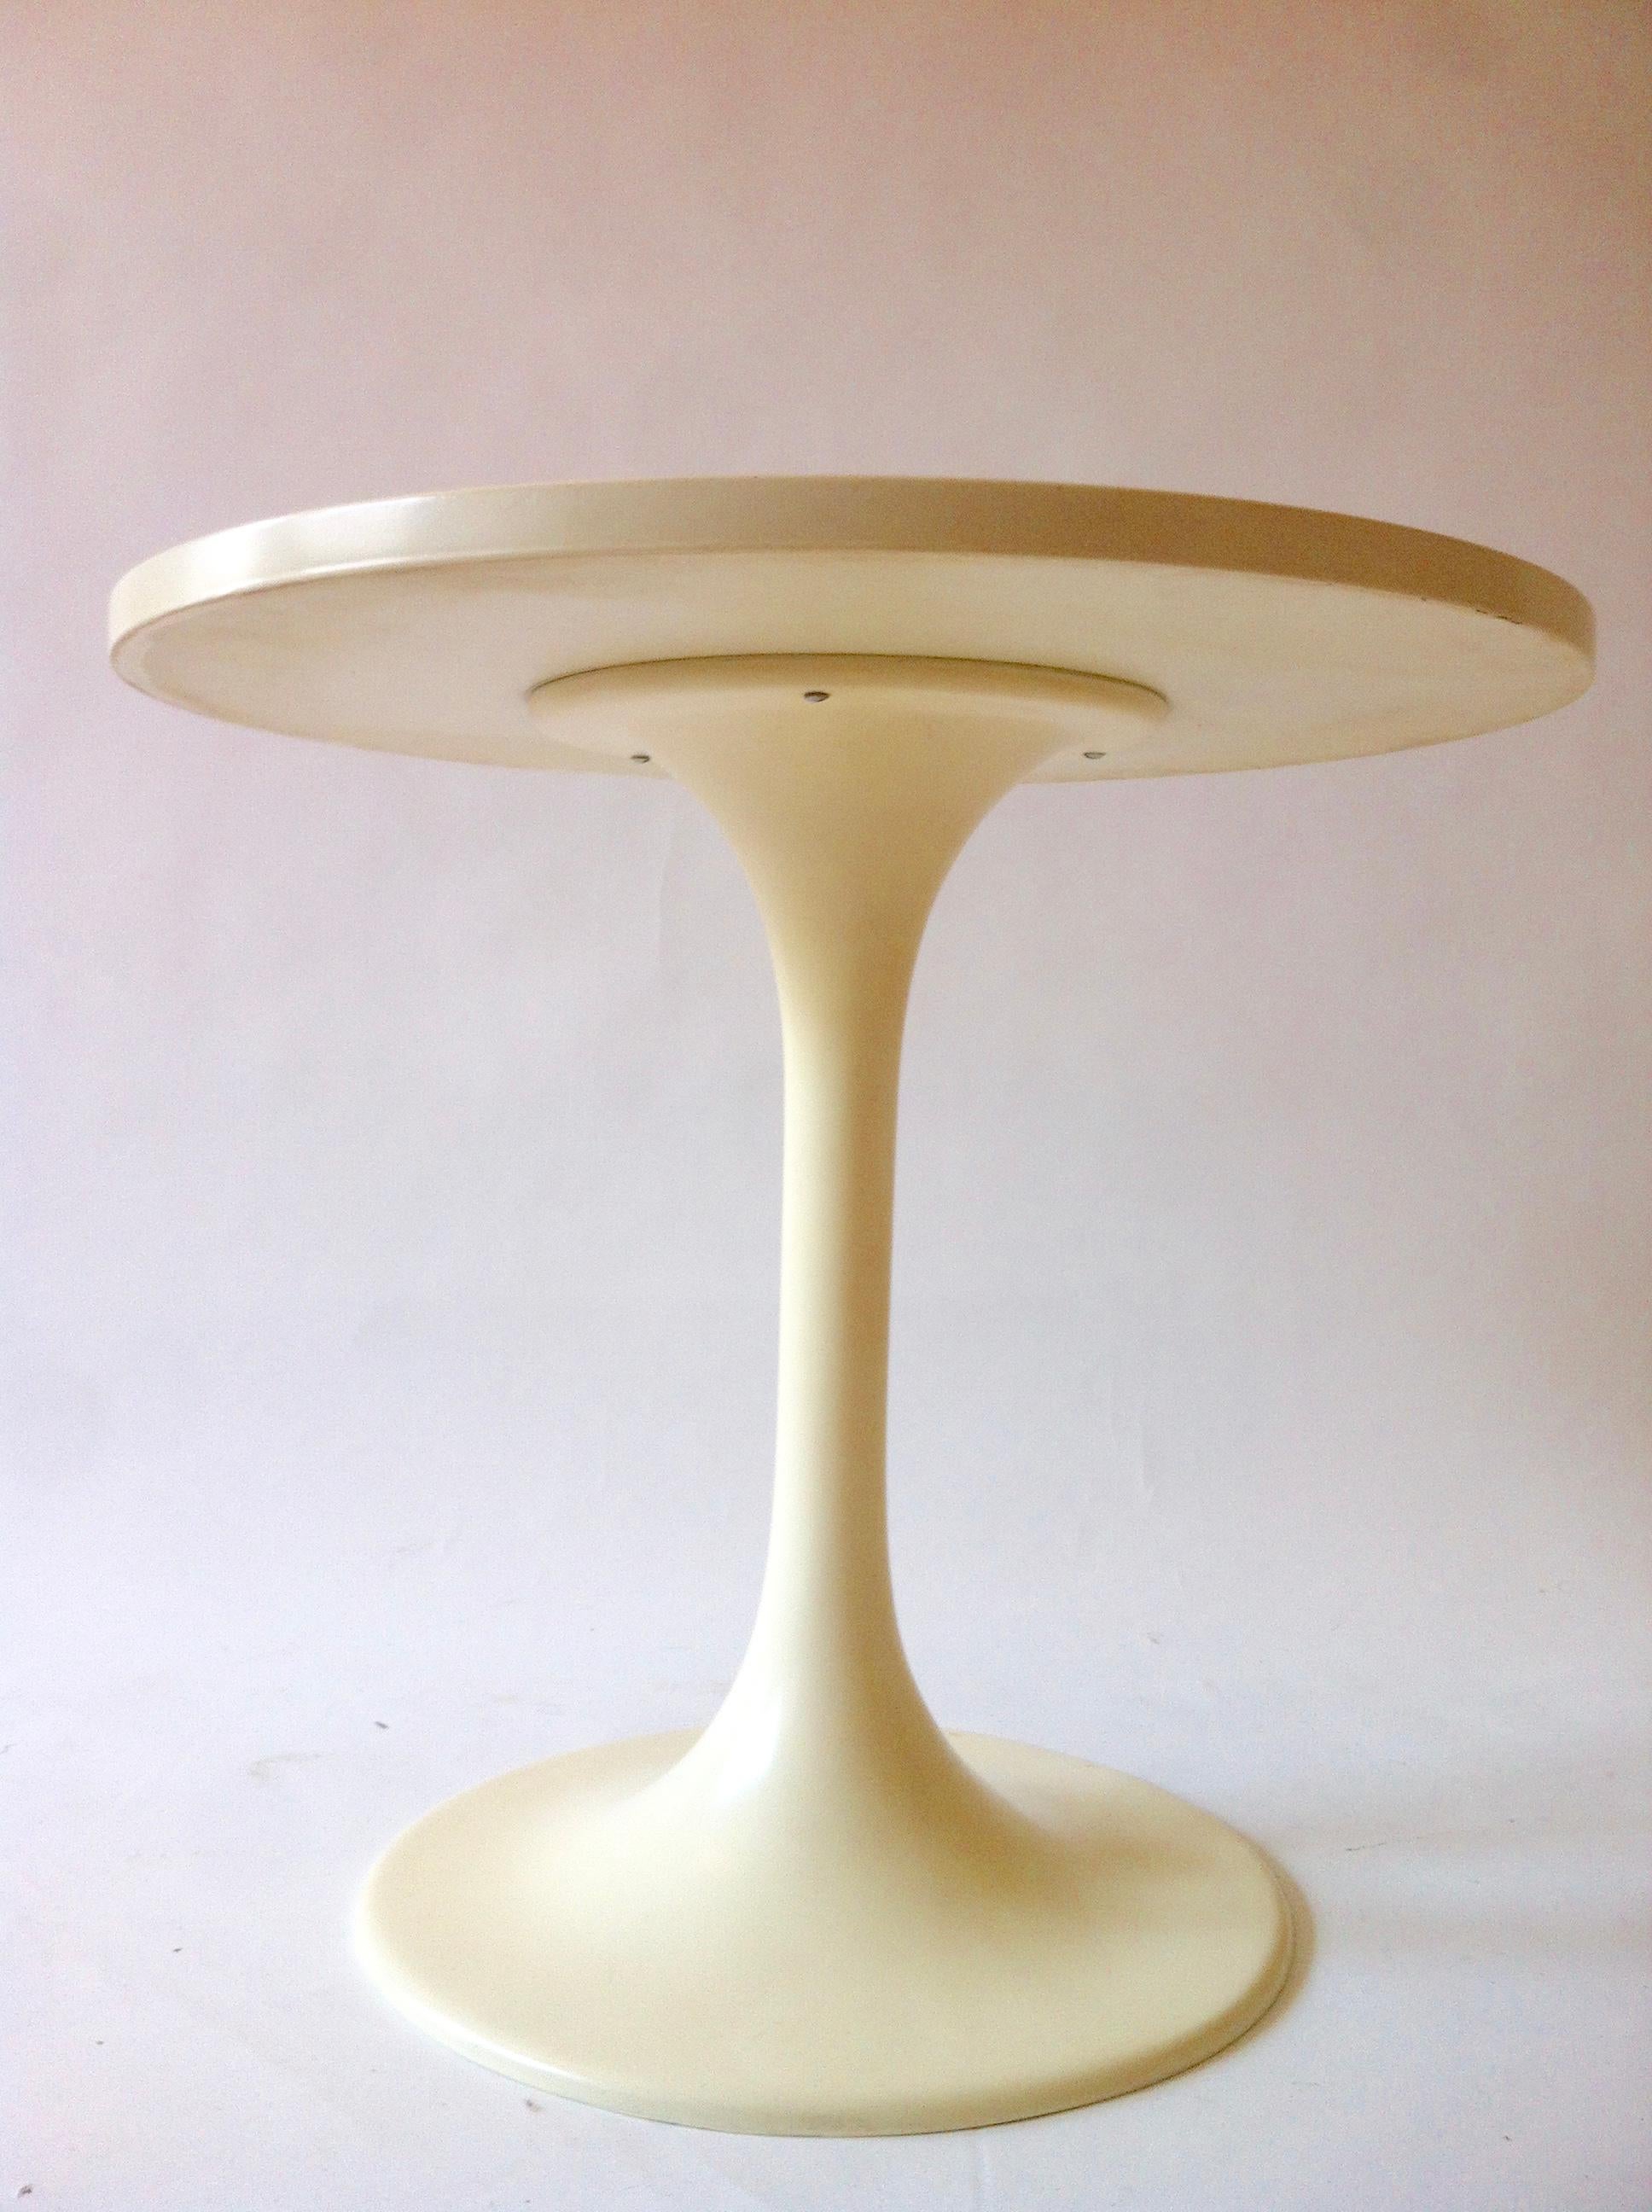 Space Age Midcentury Tulip Wood and Resine Coffee Table by Felpam, 1960s For Sale